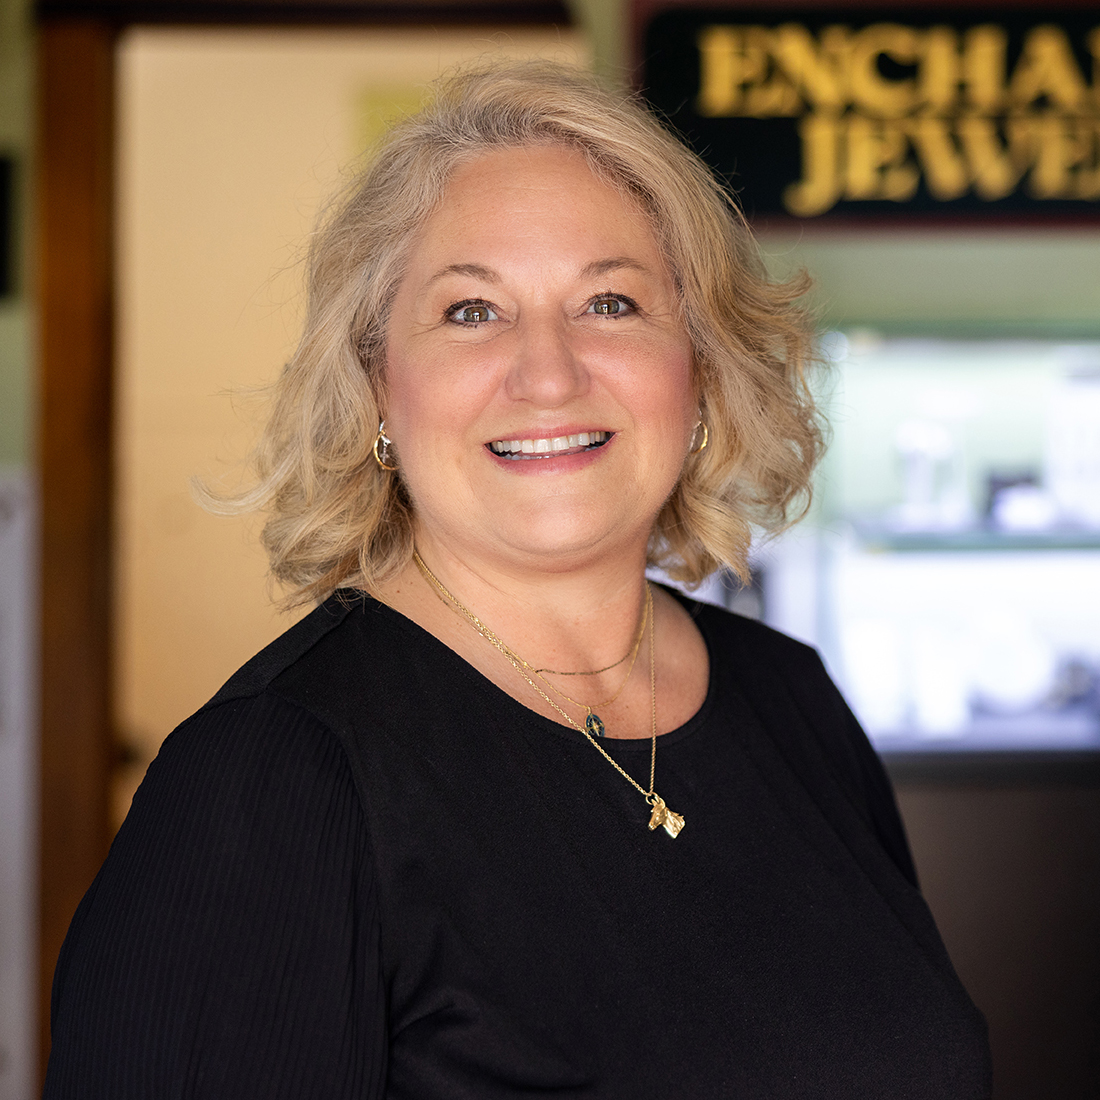 Jill S. Keith, Owner of Enchanted Jewelry